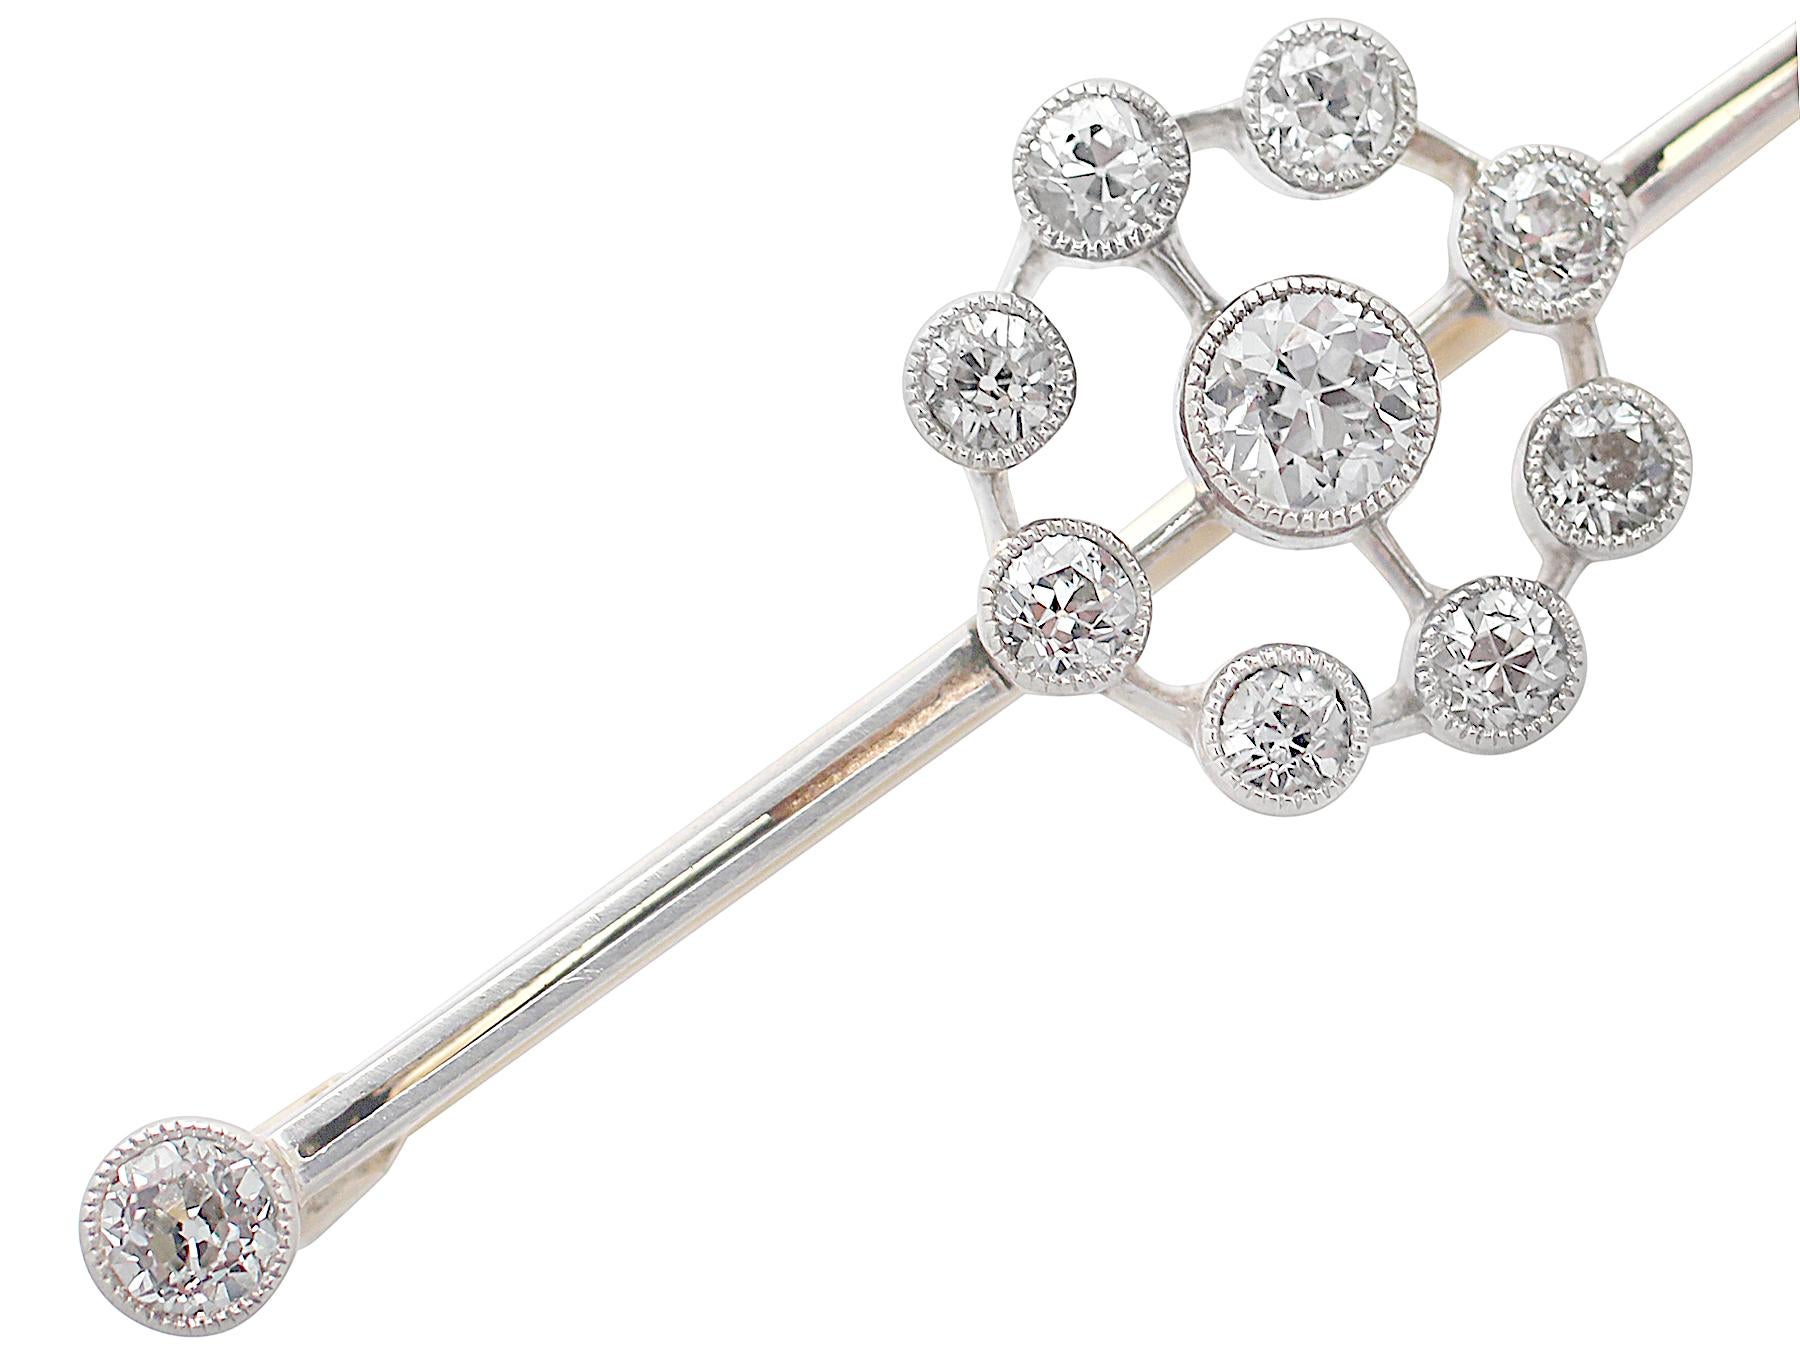 A fine and impressive antique 0.92 carat diamond and 18 karat yellow gold, platinum set bar brooch; part of our antique jewelry and estate jewelry collections.

This fine antique diamond bar brooch has been crafted in 18k yellow gold with a platinum